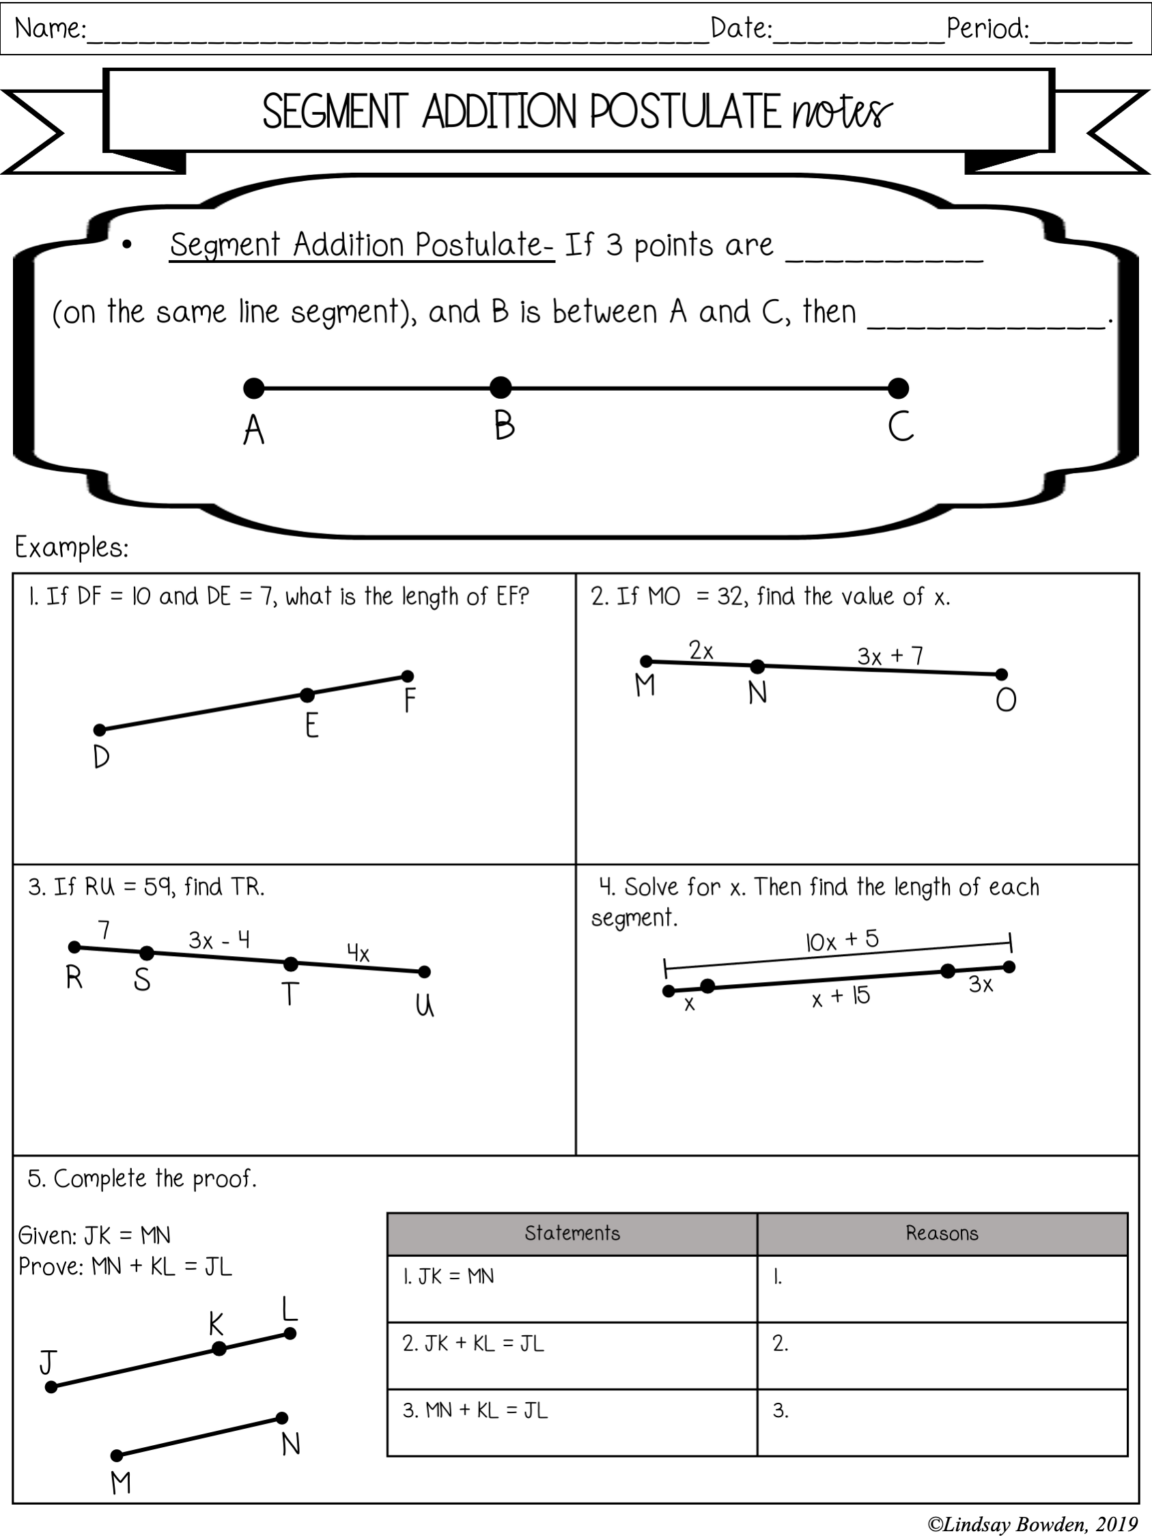 segment-and-angle-addition-postulate-notes-and-worksheets-lindsay-bowden